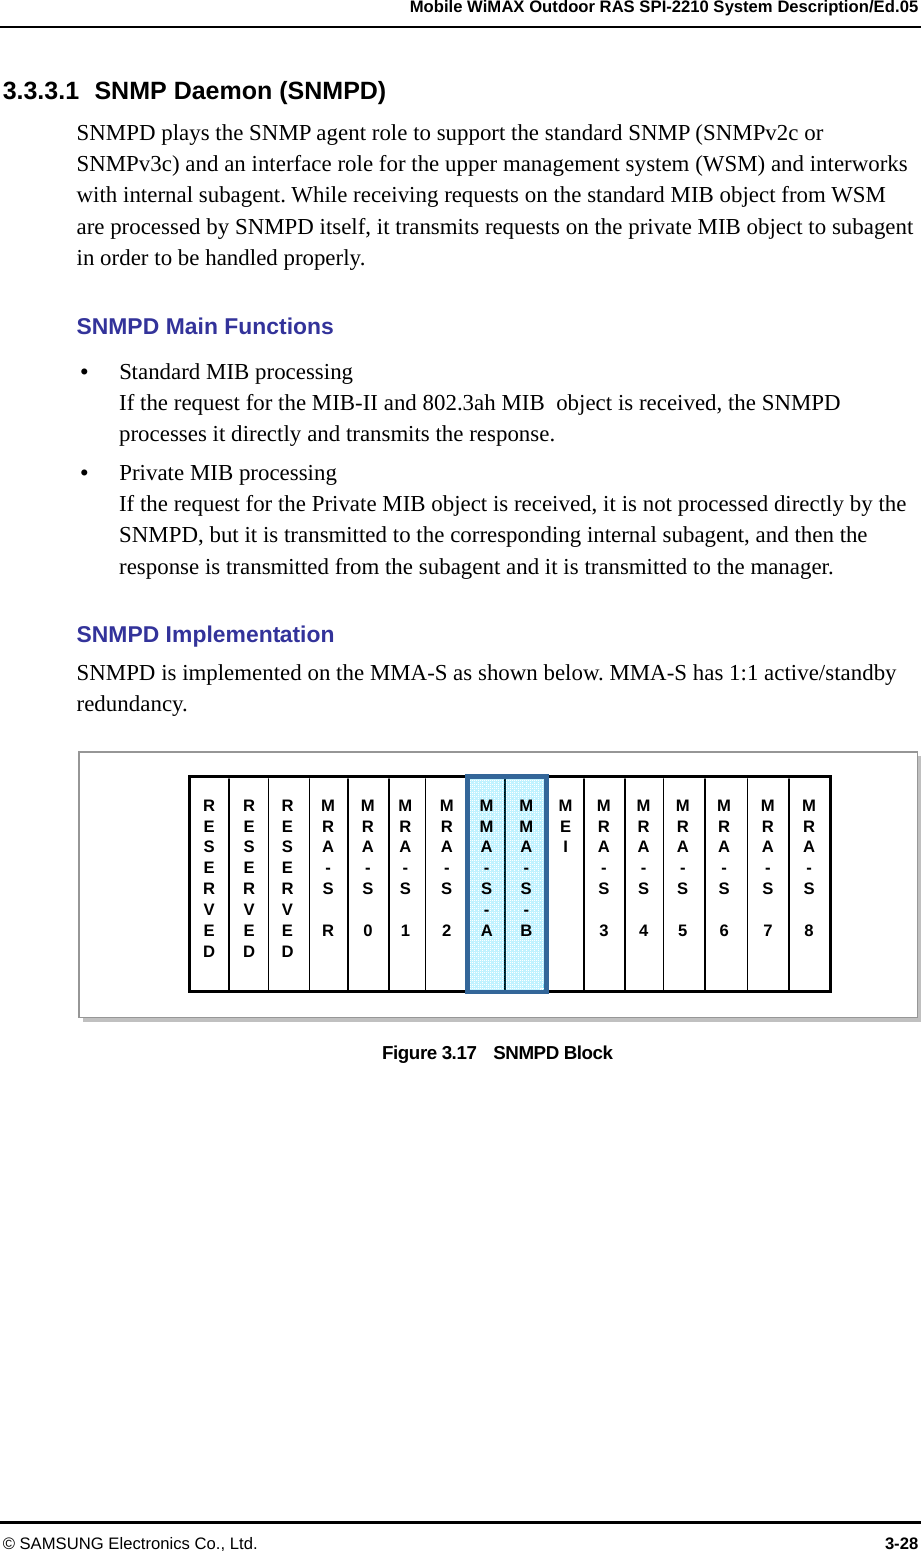   Mobile WiMAX Outdoor RAS SPI-2210 System Description/Ed.05 © SAMSUNG Electronics Co., Ltd.  3-28 3.3.3.1  SNMP Daemon (SNMPD) SNMPD plays the SNMP agent role to support the standard SNMP (SNMPv2c or SNMPv3c) and an interface role for the upper management system (WSM) and interworks with internal subagent. While receiving requests on the standard MIB object from WSM are processed by SNMPD itself, it transmits requests on the private MIB object to subagent in order to be handled properly.    SNMPD Main Functions  Standard MIB processing If the request for the MIB-II and 802.3ah MIB  object is received, the SNMPD processes it directly and transmits the response.  Private MIB processing If the request for the Private MIB object is received, it is not processed directly by the SNMPD, but it is transmitted to the corresponding internal subagent, and then the response is transmitted from the subagent and it is transmitted to the manager.  SNMPD Implementation SNMPD is implemented on the MMA-S as shown below. MMA-S has 1:1 active/standby redundancy.  Figure 3.17    SNMPD Block  RESERVED MRA- S  R MMA-S- AMMA-S- BMEI RESERVED RESERVED MRA- S 0MRA- S 1MRA- S 2MRA- S 3MRA- S 4MRA- S 5MRA- S 6MRA- S  7 MRA- S  8 